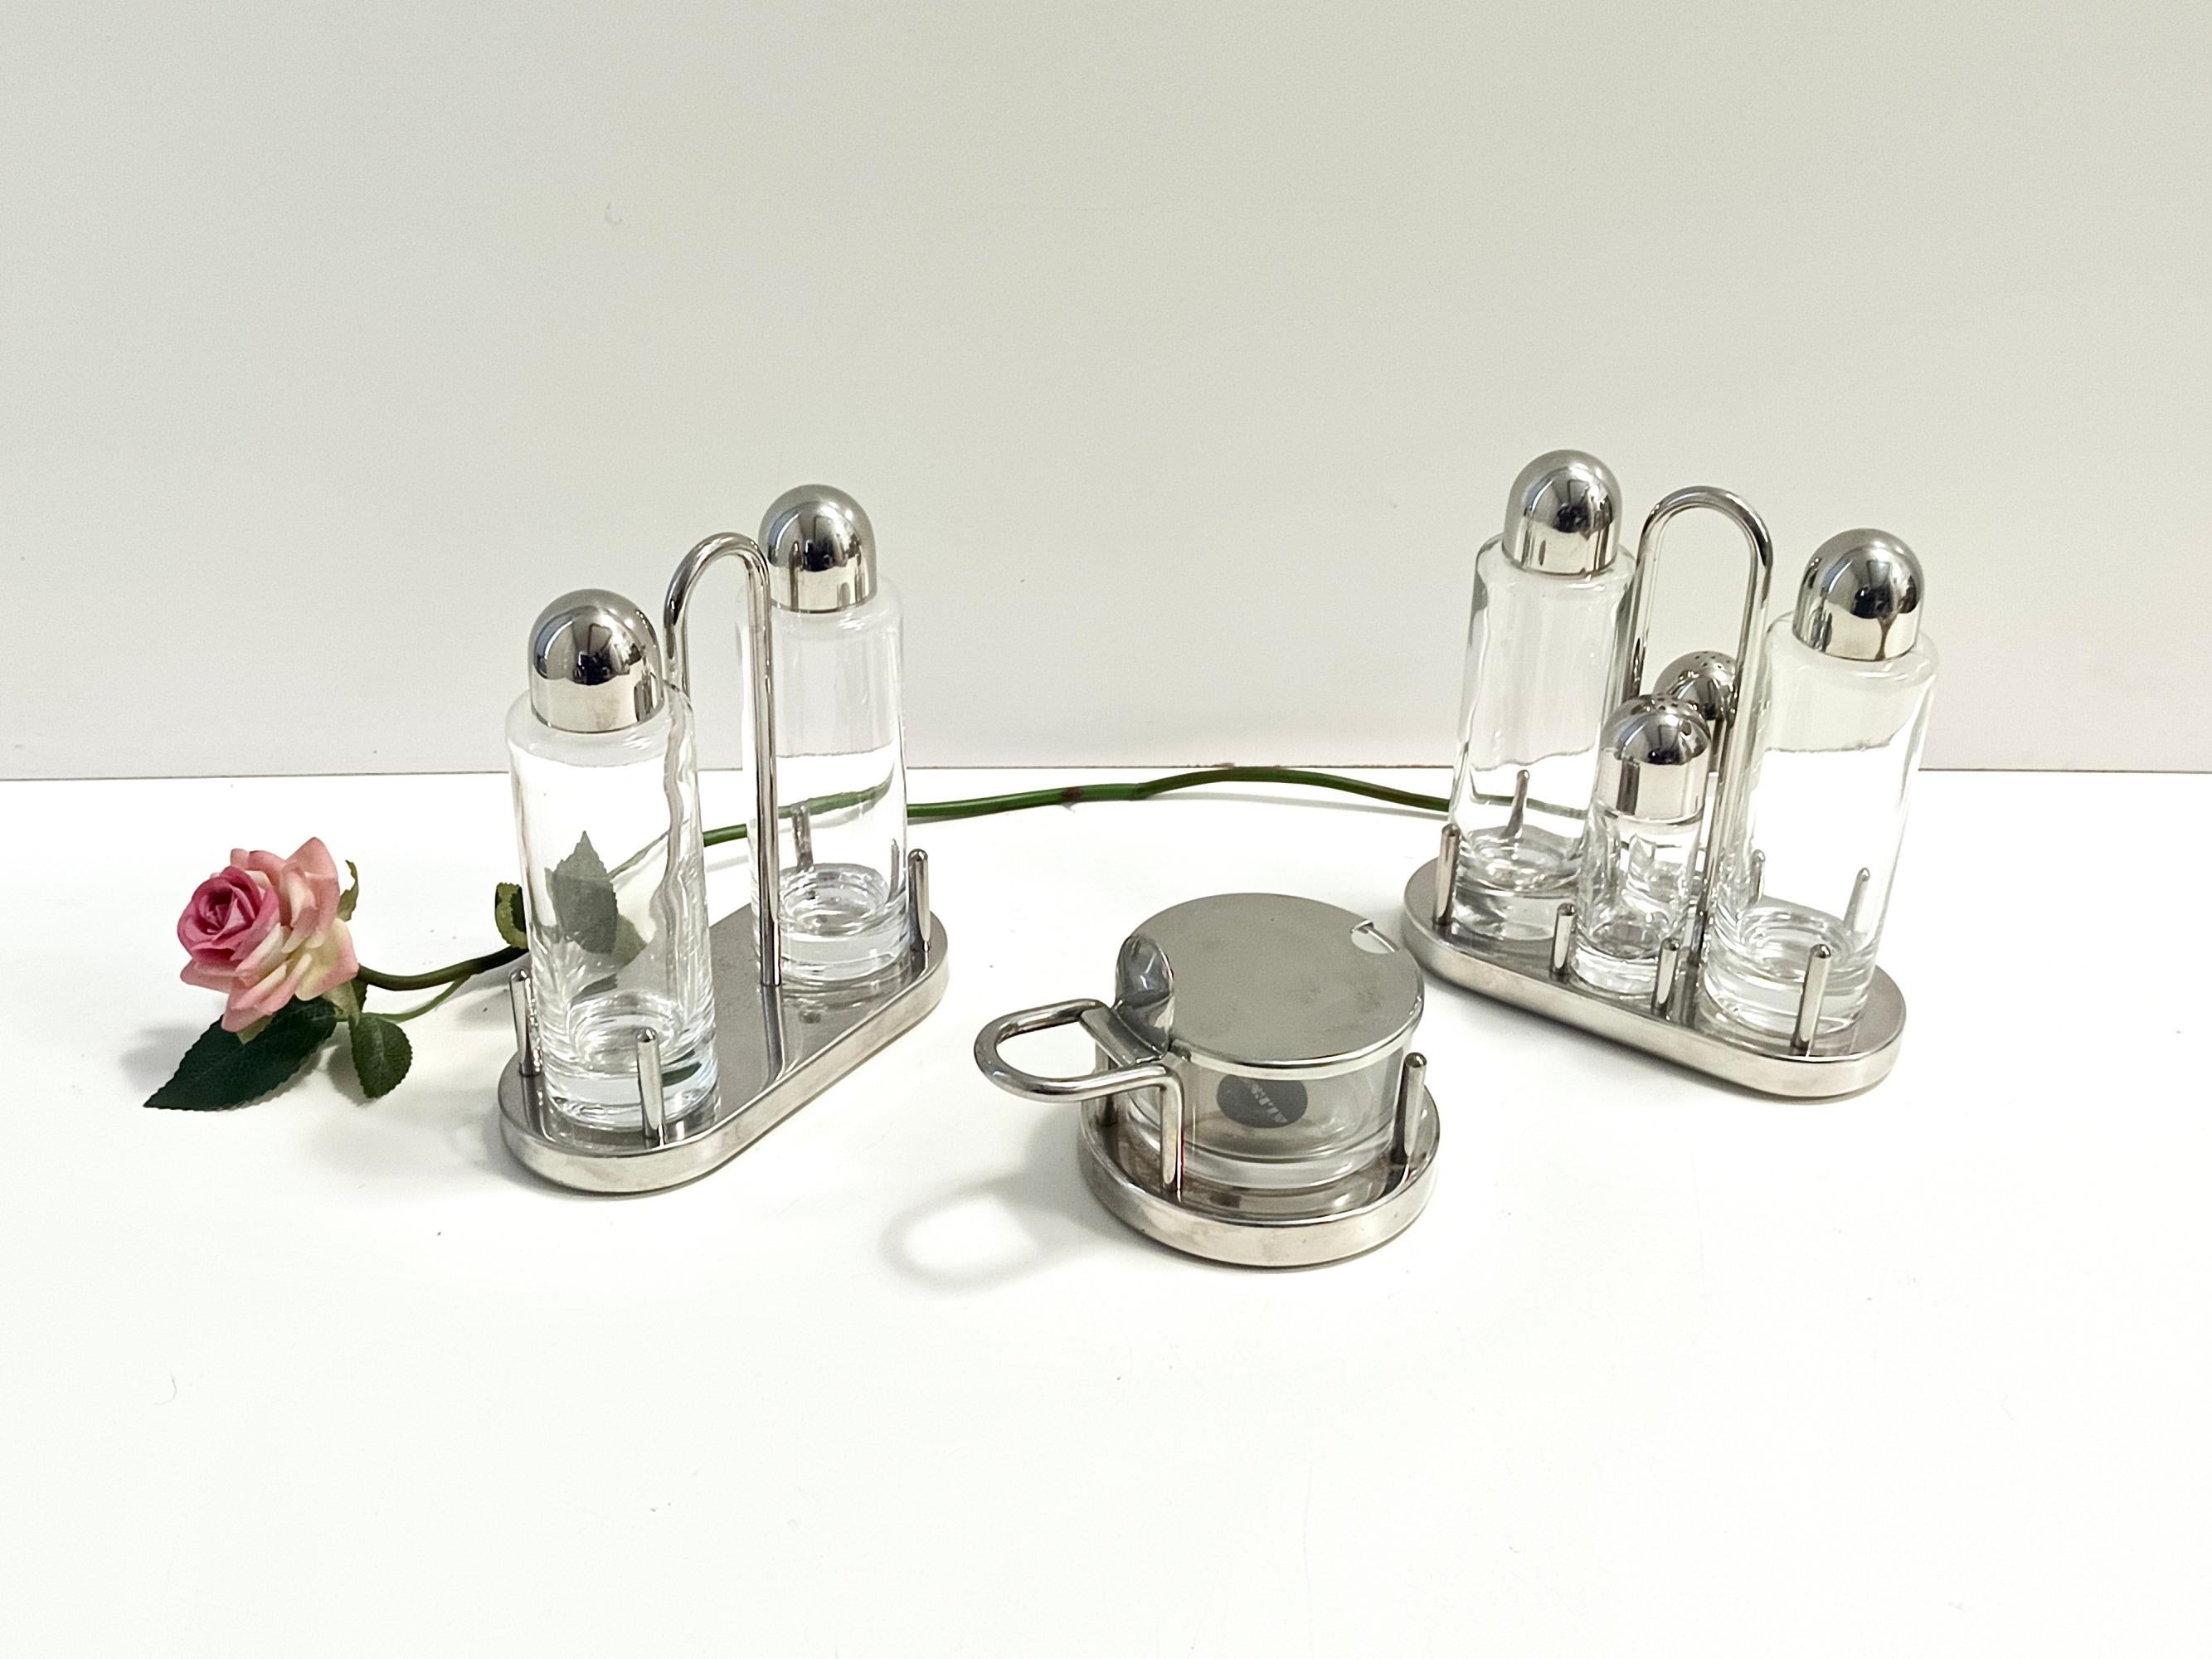 Post-Modern Steel, Glass and Plastic Cruet Set with Cheese Bowl by E. Sottsass for Alessi For Sale